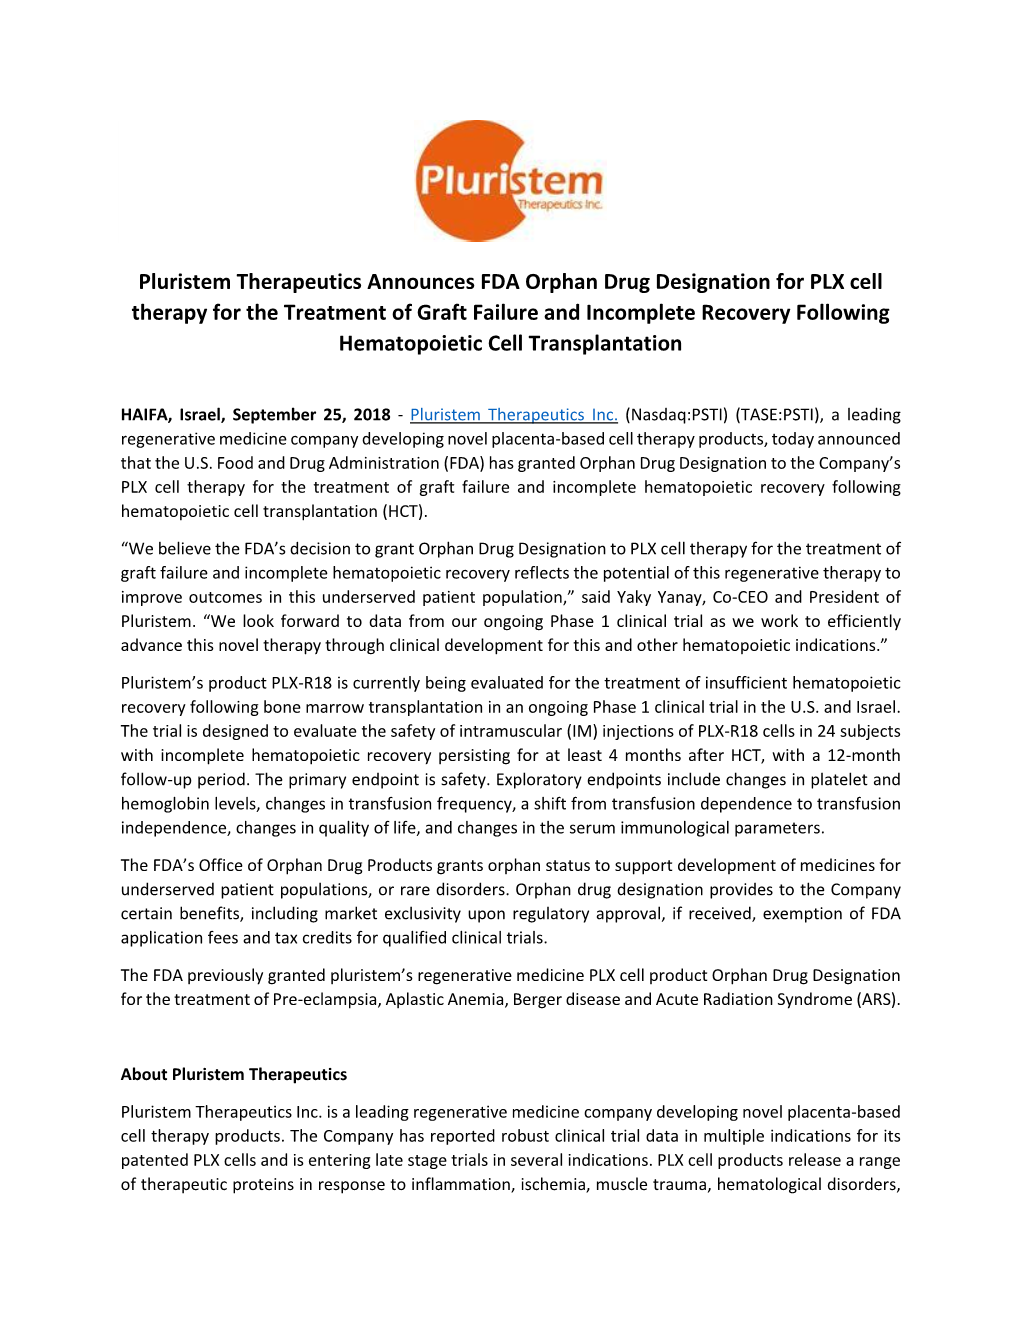 Pluristem Therapeutics Announces FDA Orphan Drug Designation for PLX Cell Therapy for the Treatment of Graft Failure and Incompl